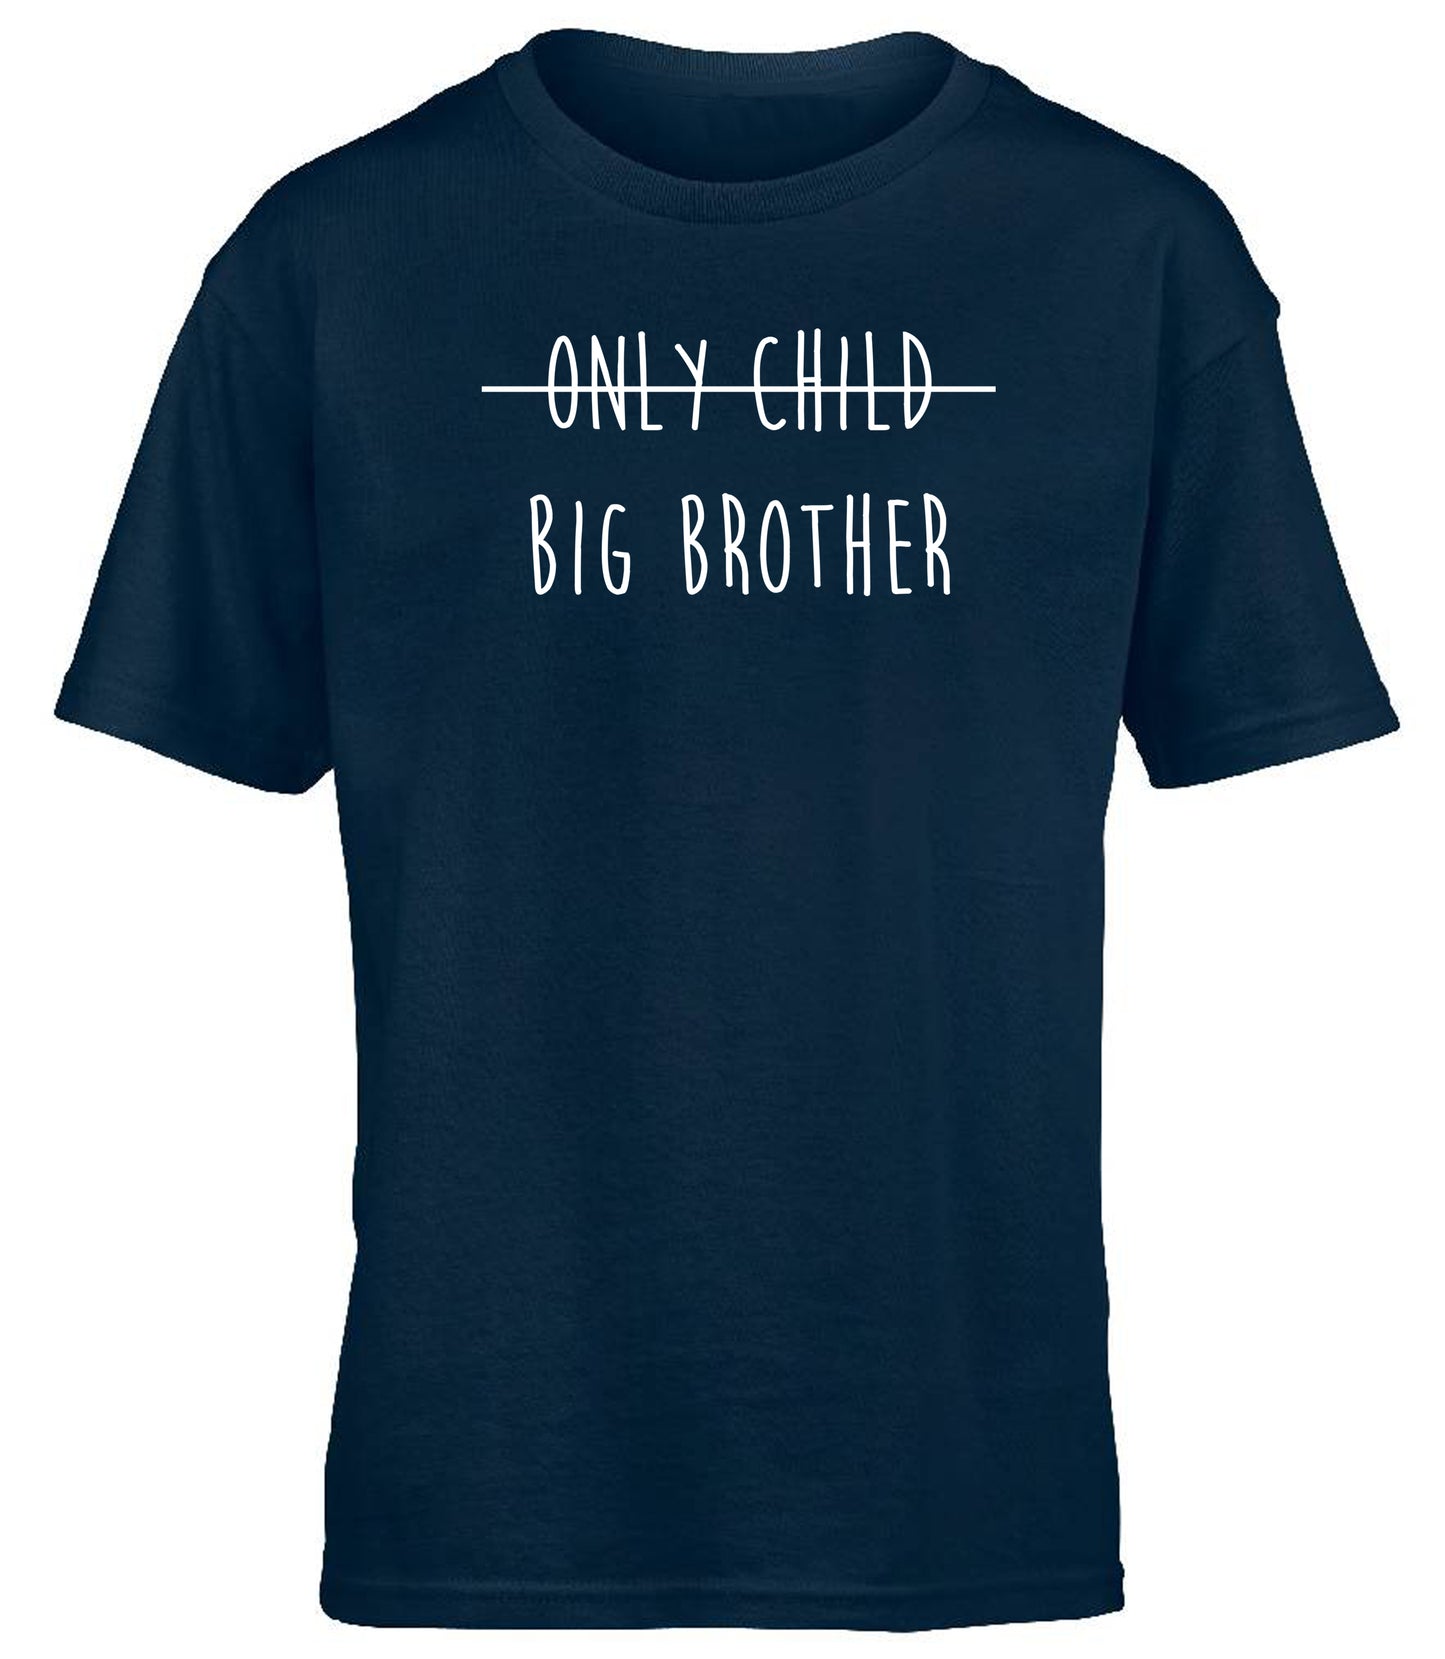 Not an Only Child, Big Brother children's T-shirt